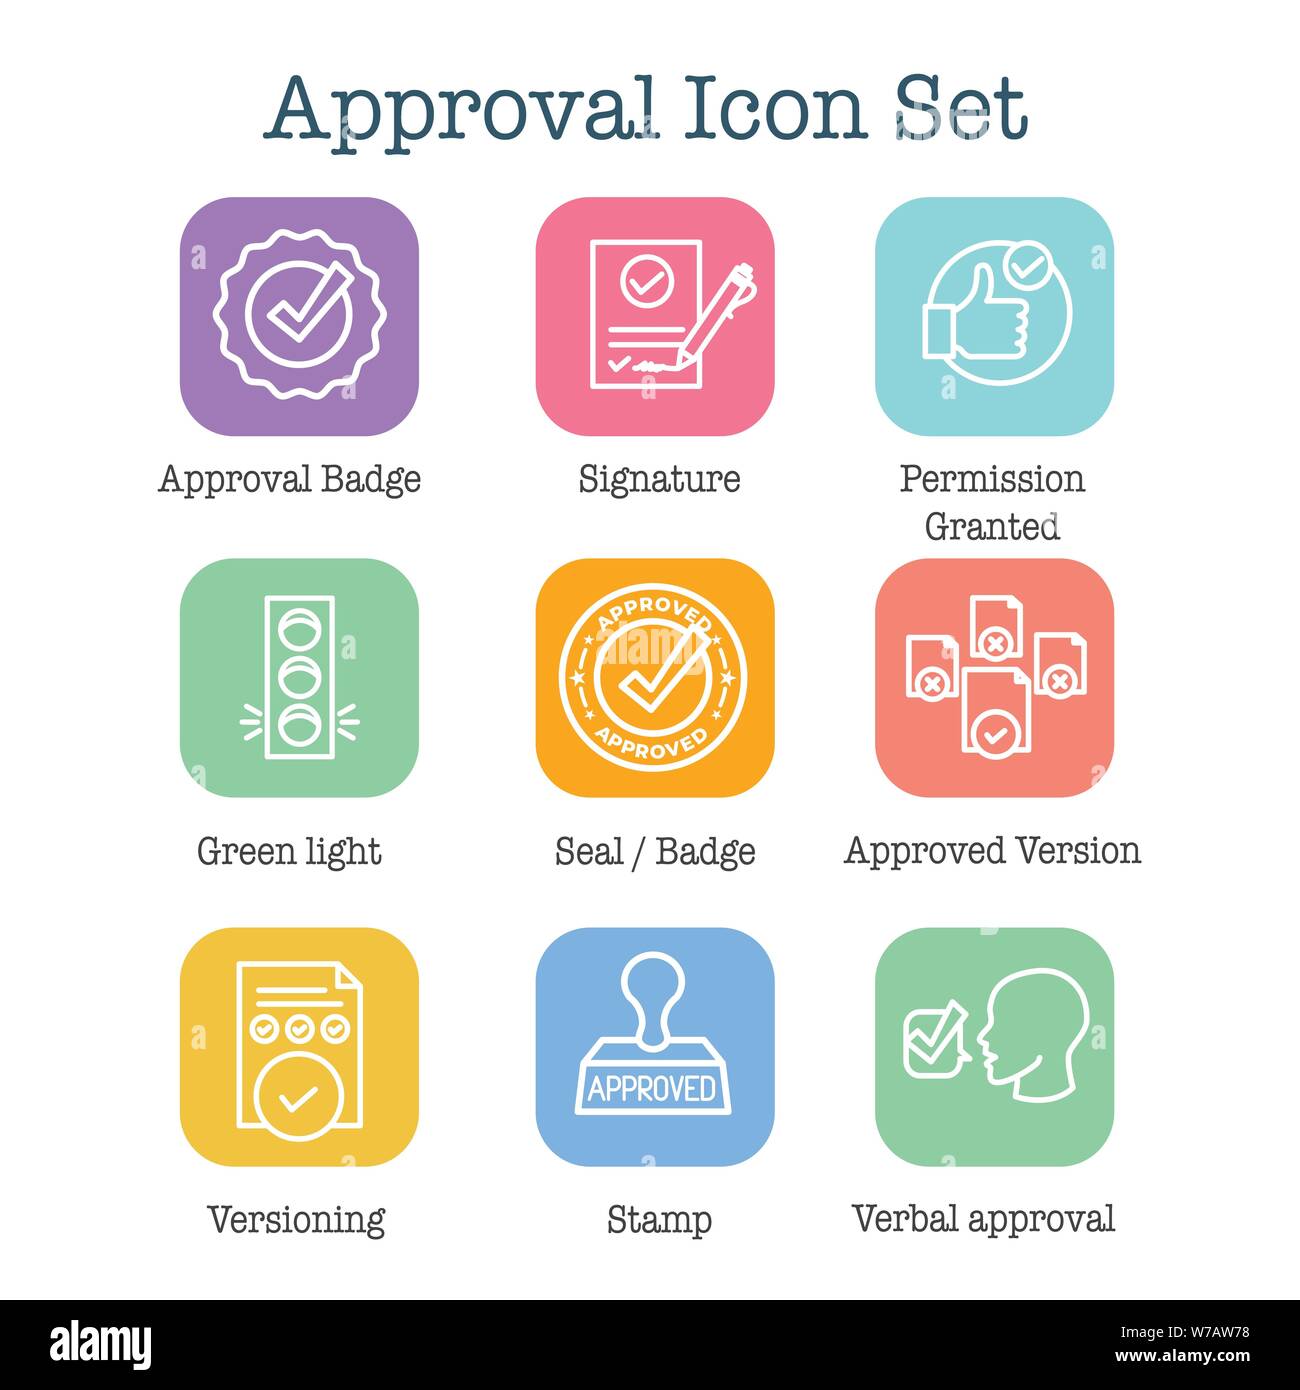 Approval & Signature Icon Set with Stamp and version icons Stock Vector